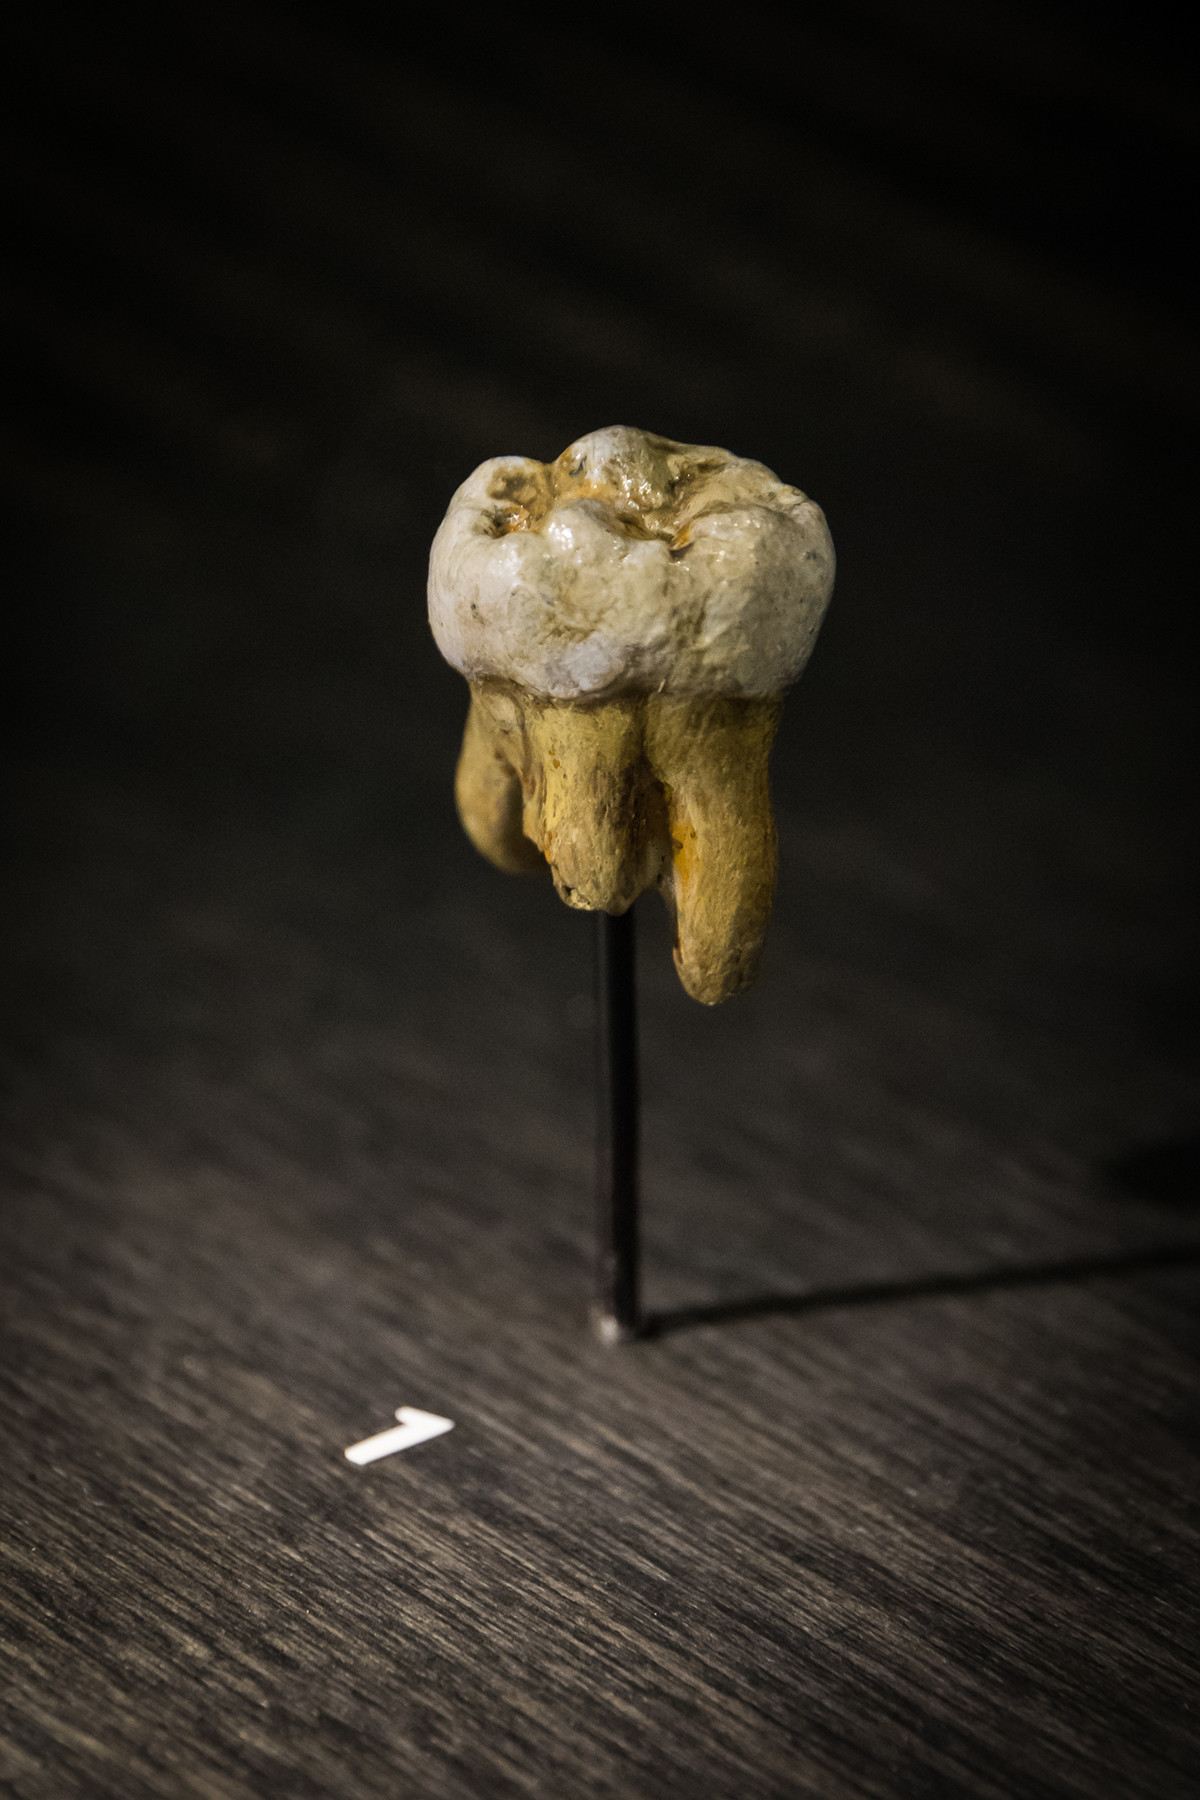 The molar tooth of a Denisovan found in 2000 